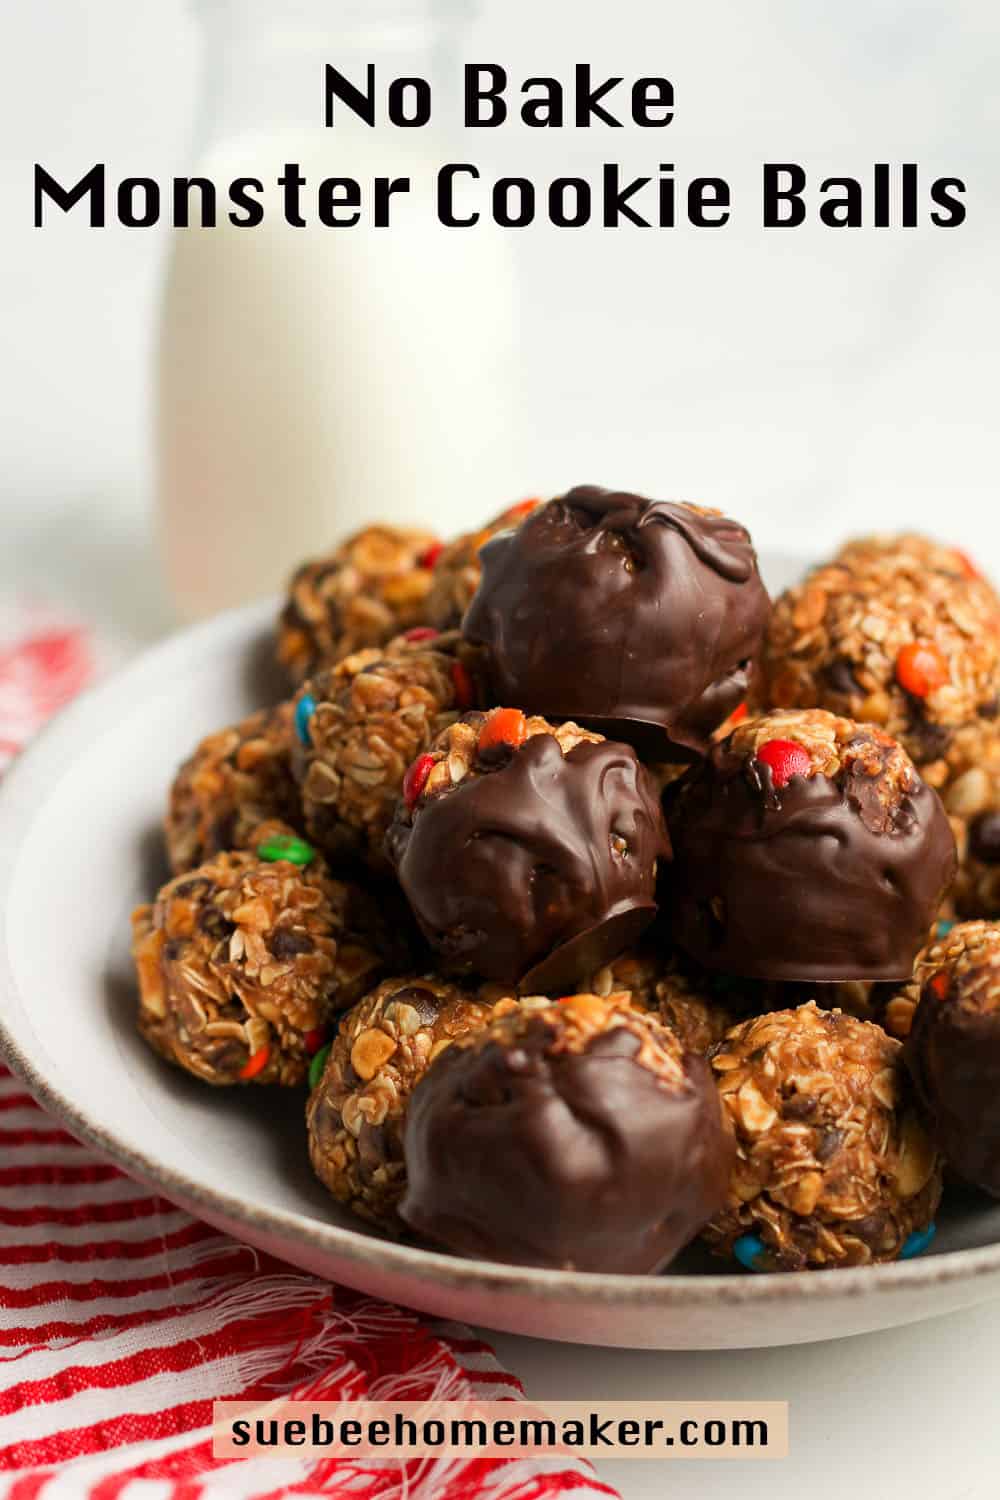 Side view of a bowl of monster cookie balls, no bake.